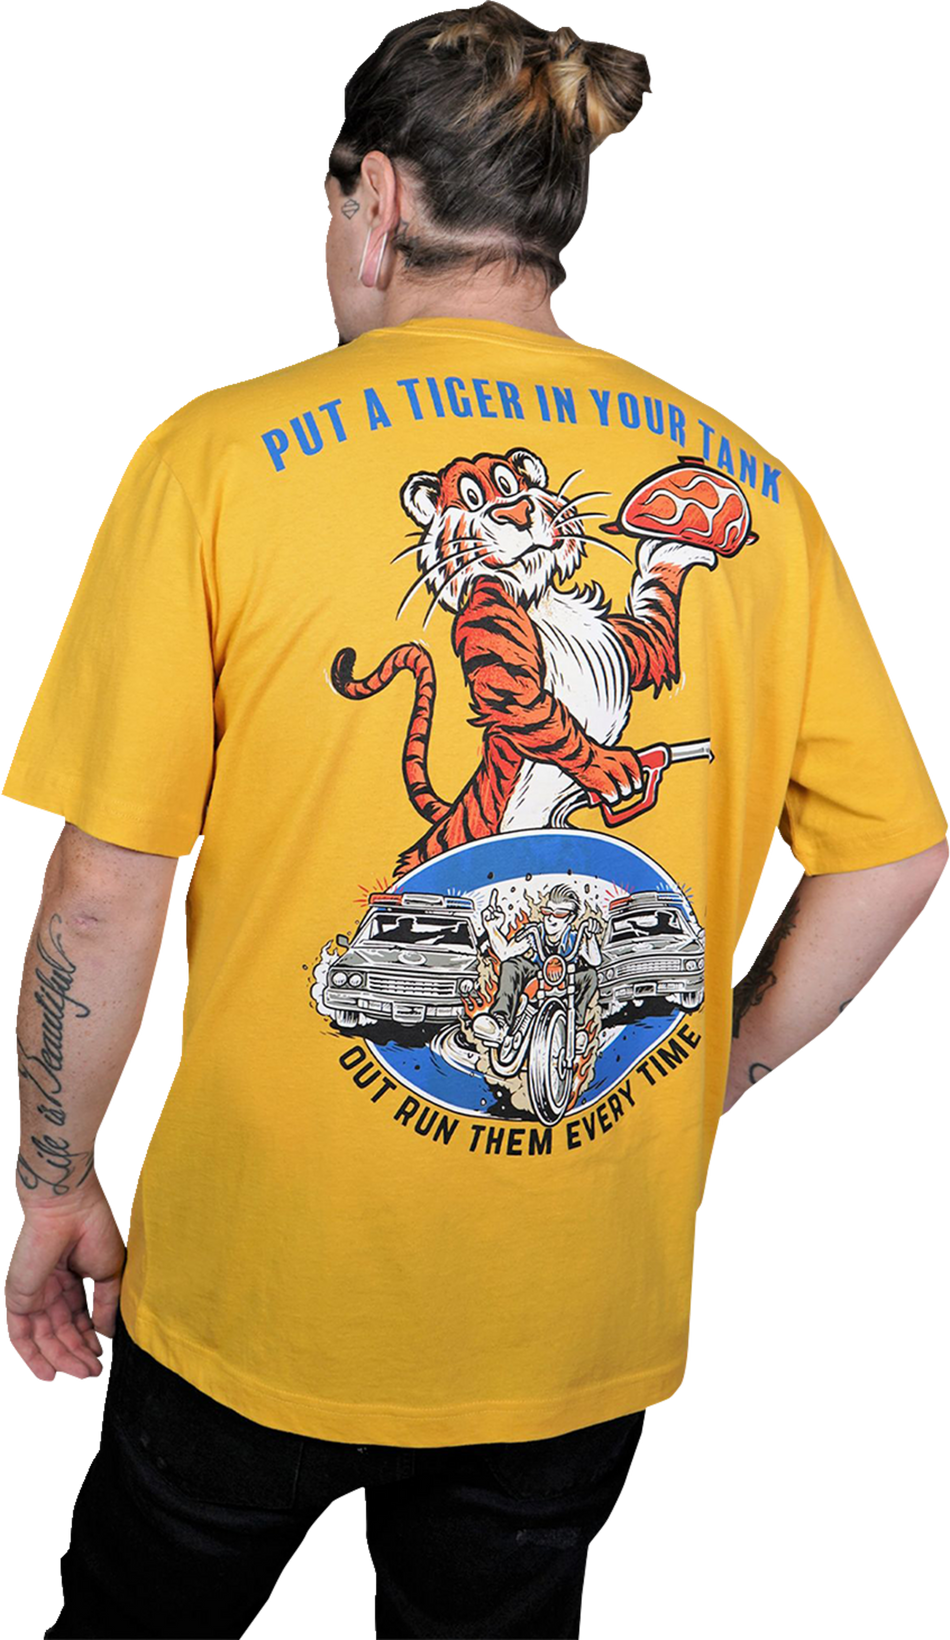 LETHAL THREAT Down-N-Out Tiger in Your Tank - Yellow - Large DT10051L